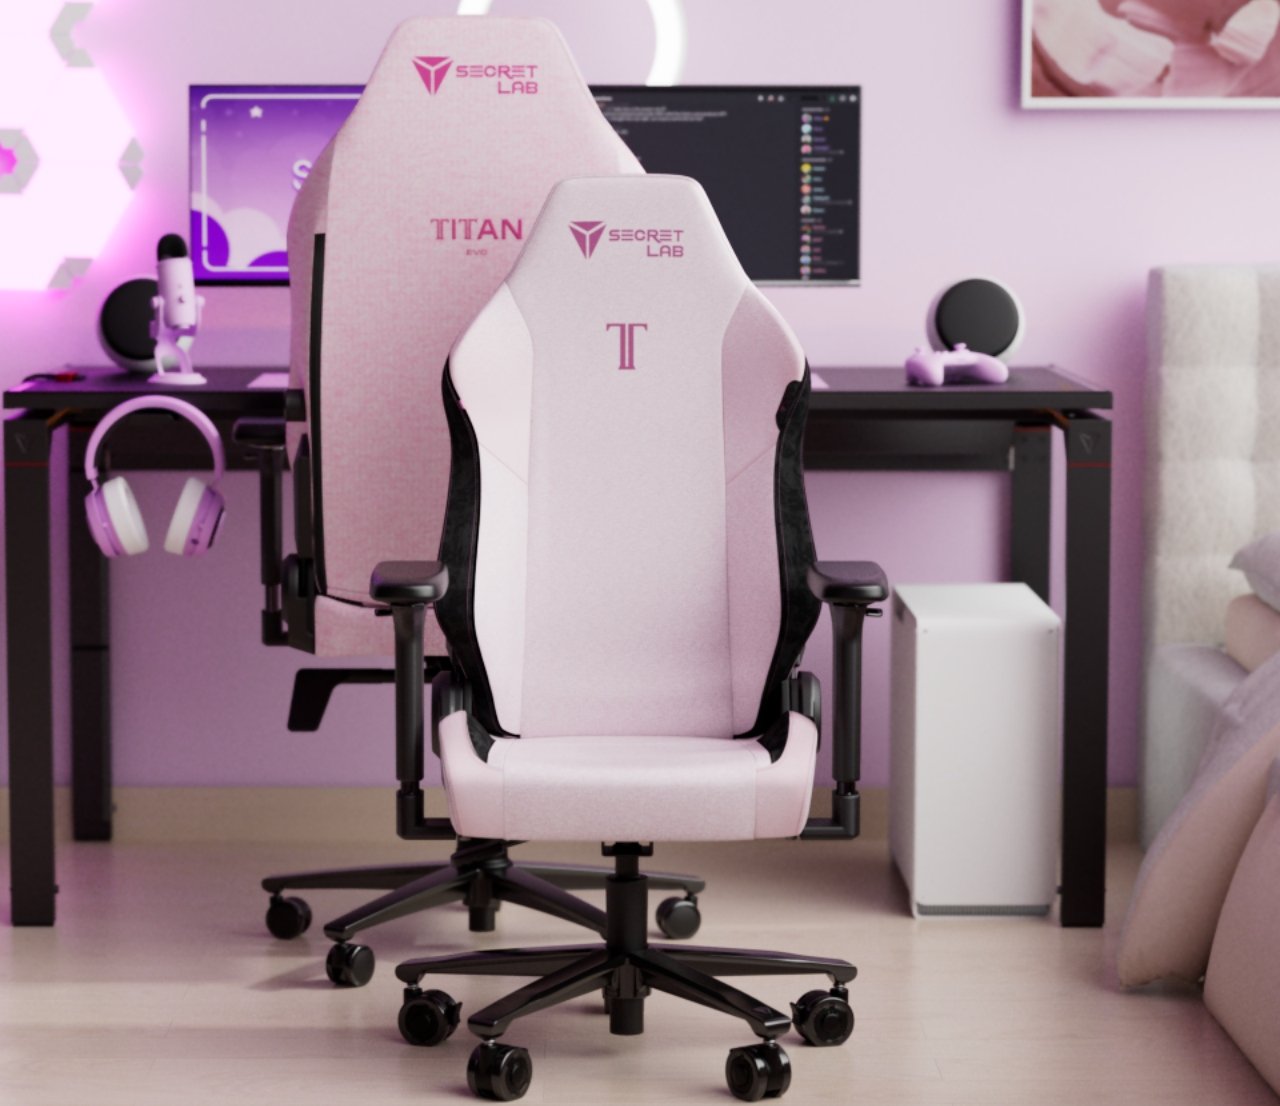 Secretlab Titan Extra Extra Small Gaming Chair Review 4